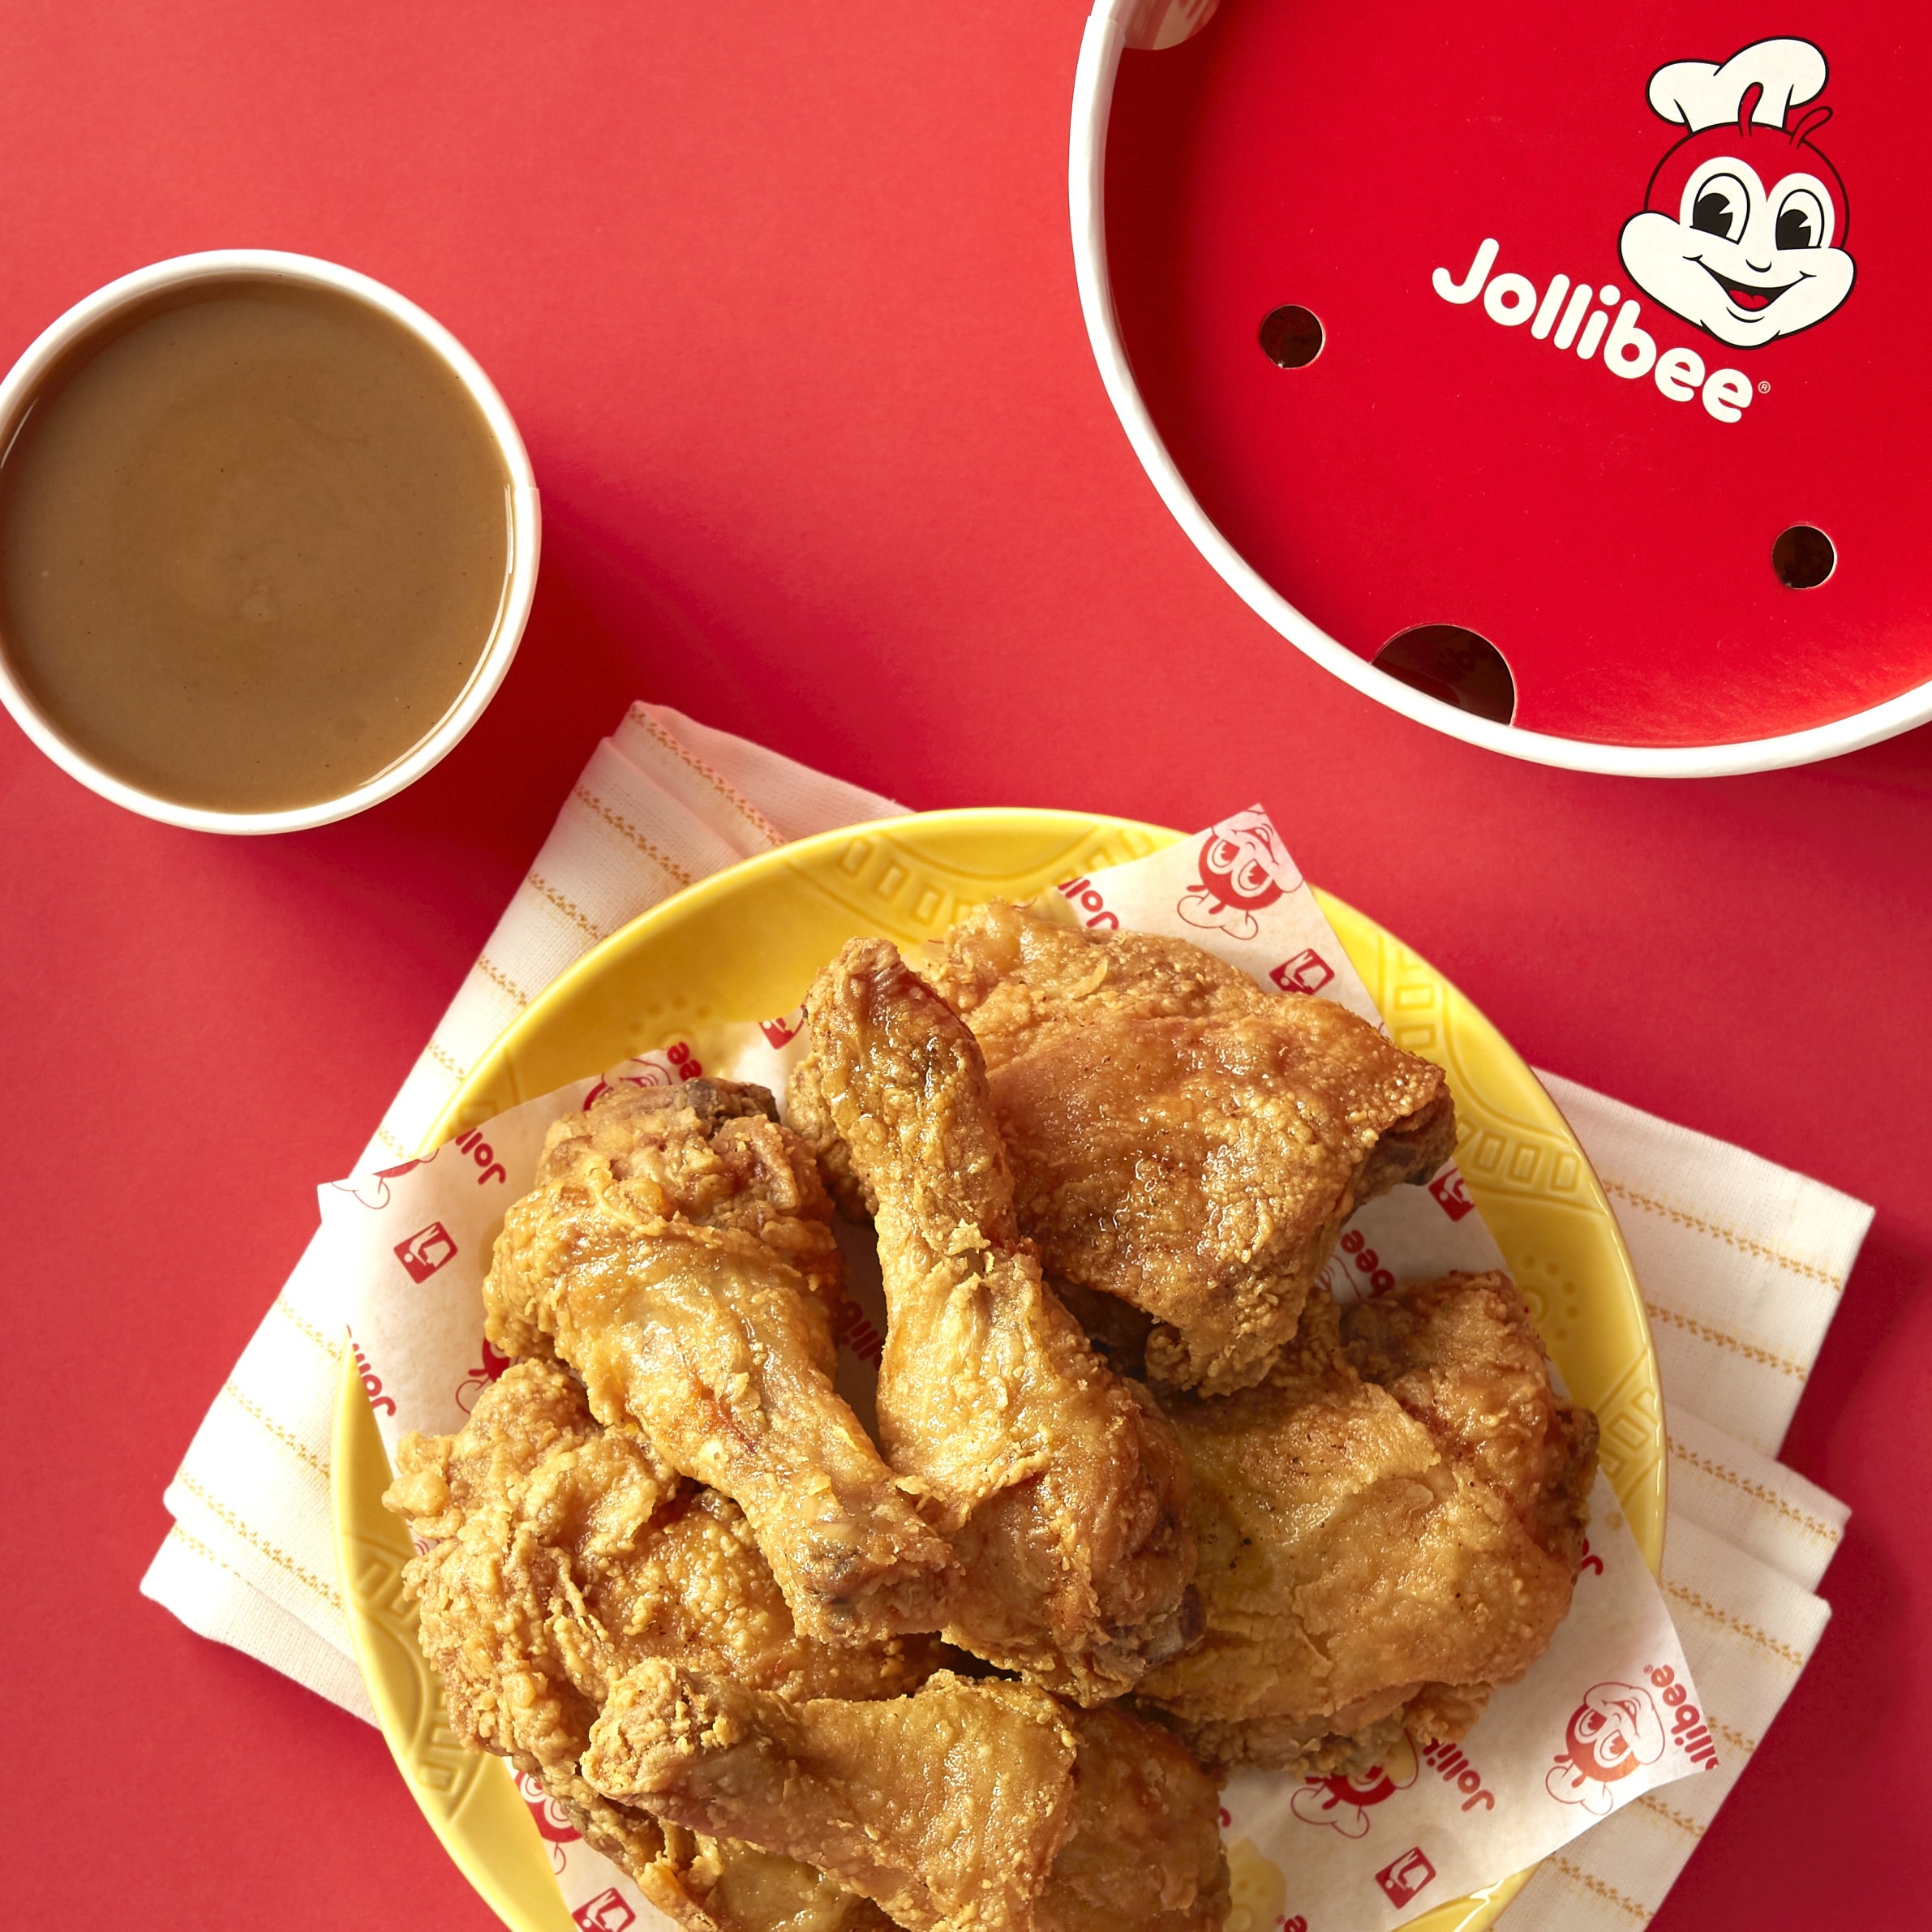 The Jollibee Group is sustaining its growth momentum overseas, as it continues to hit its aggressive global expansion targets in North America with more store openings scheduled in 2022.